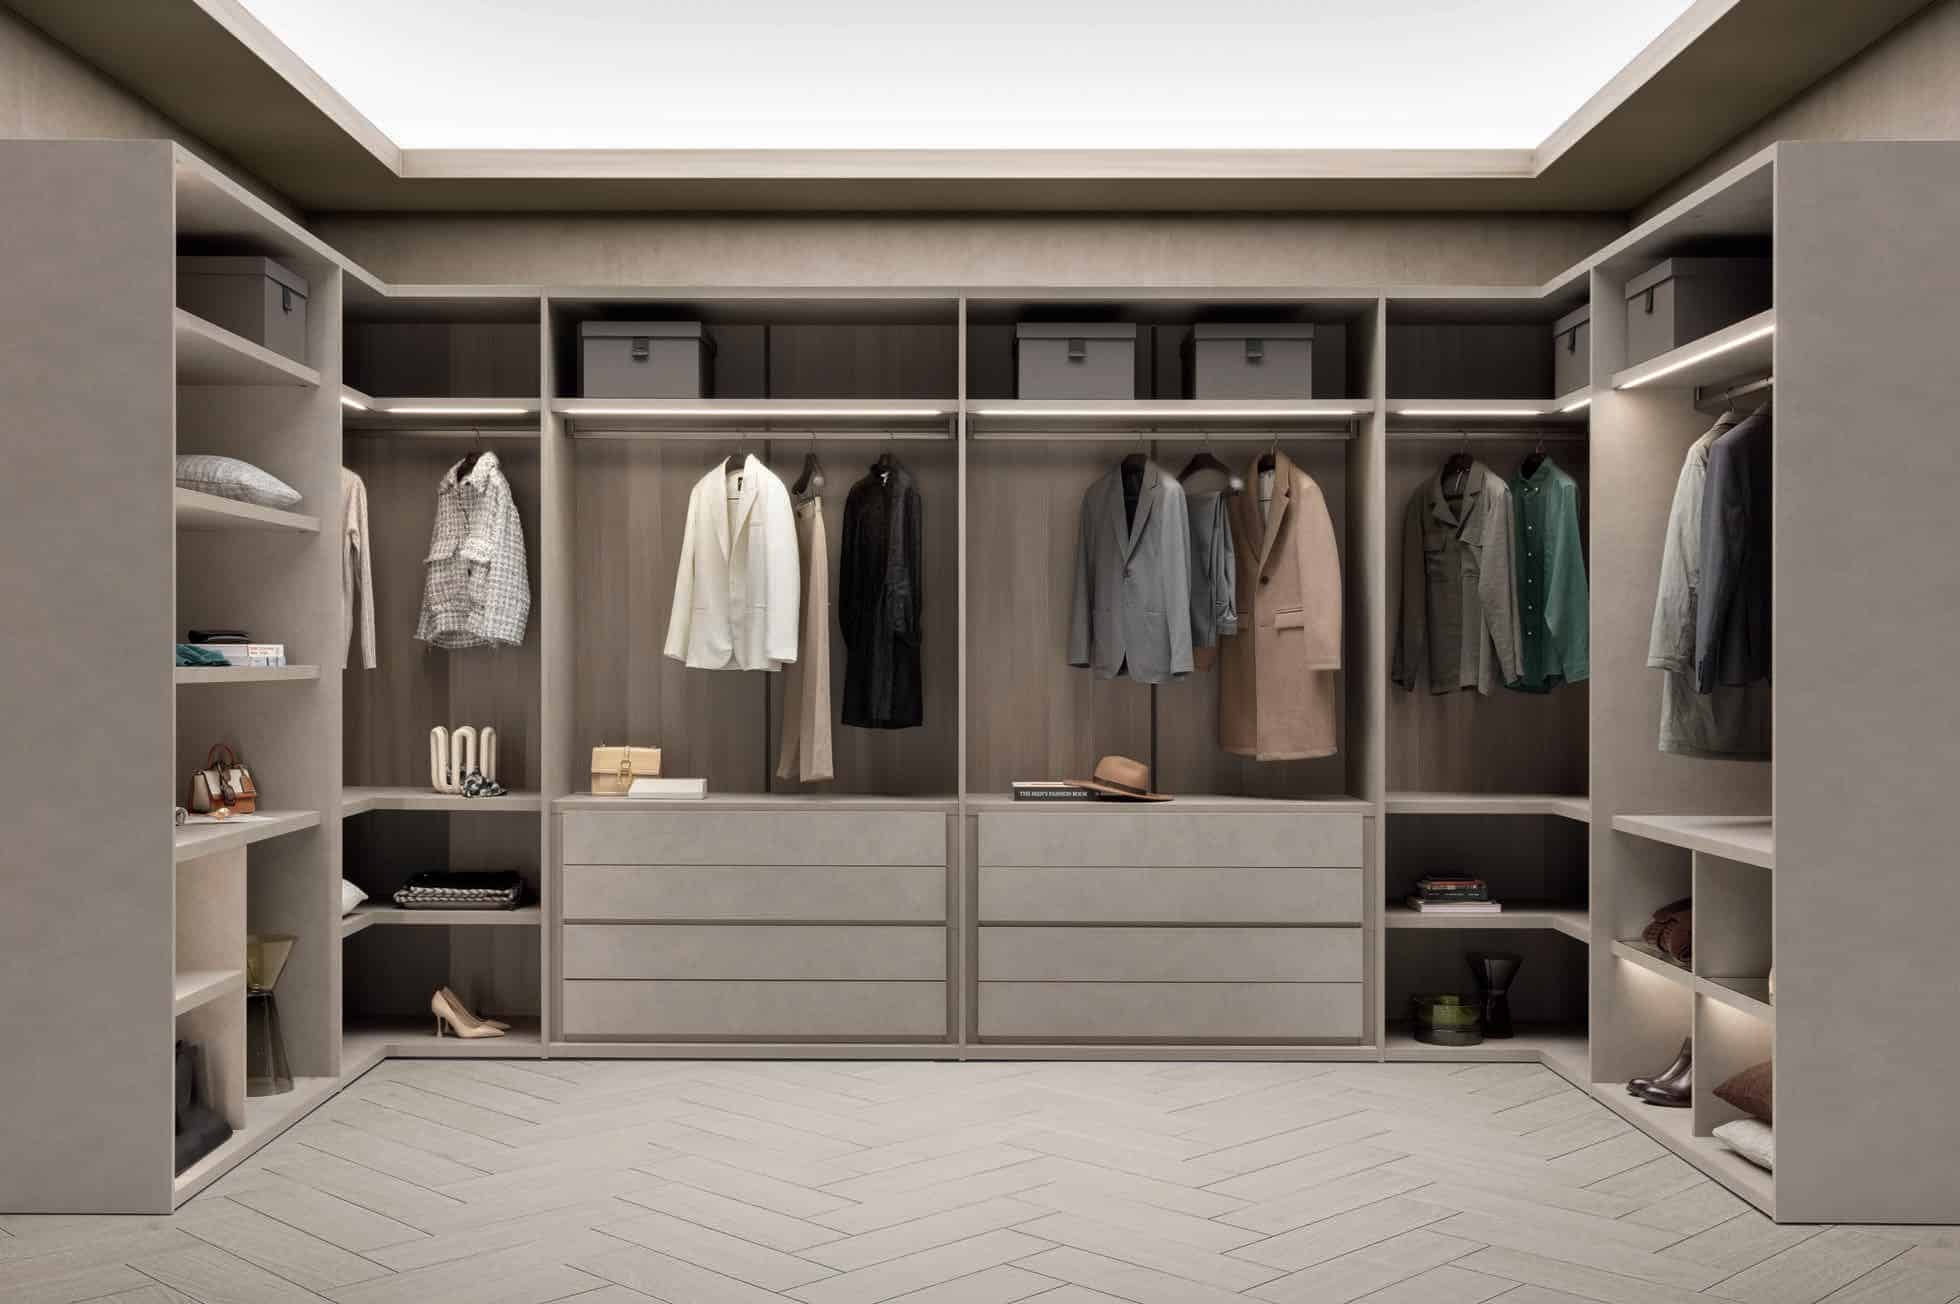 Pianca Sipario without frames, Perlage Terra materico structure, Larice Tortora materico back panels. Drawer units, shelves and partitions in Perlage Terra materico